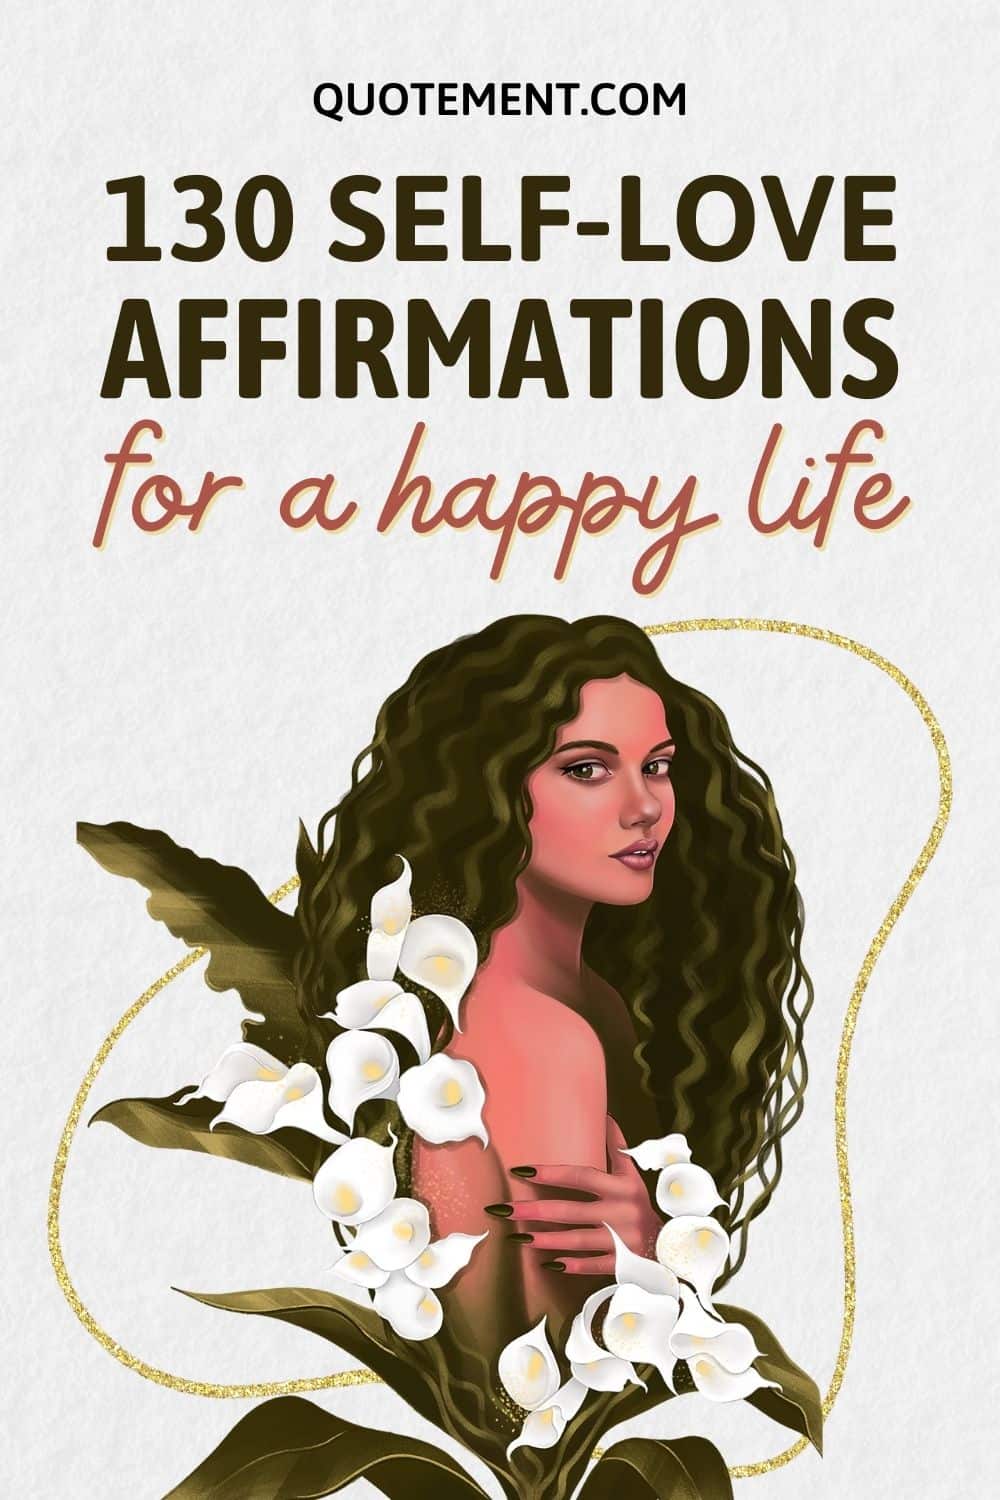 130 Self-Love Affirmations To Help You Embrace Yourself